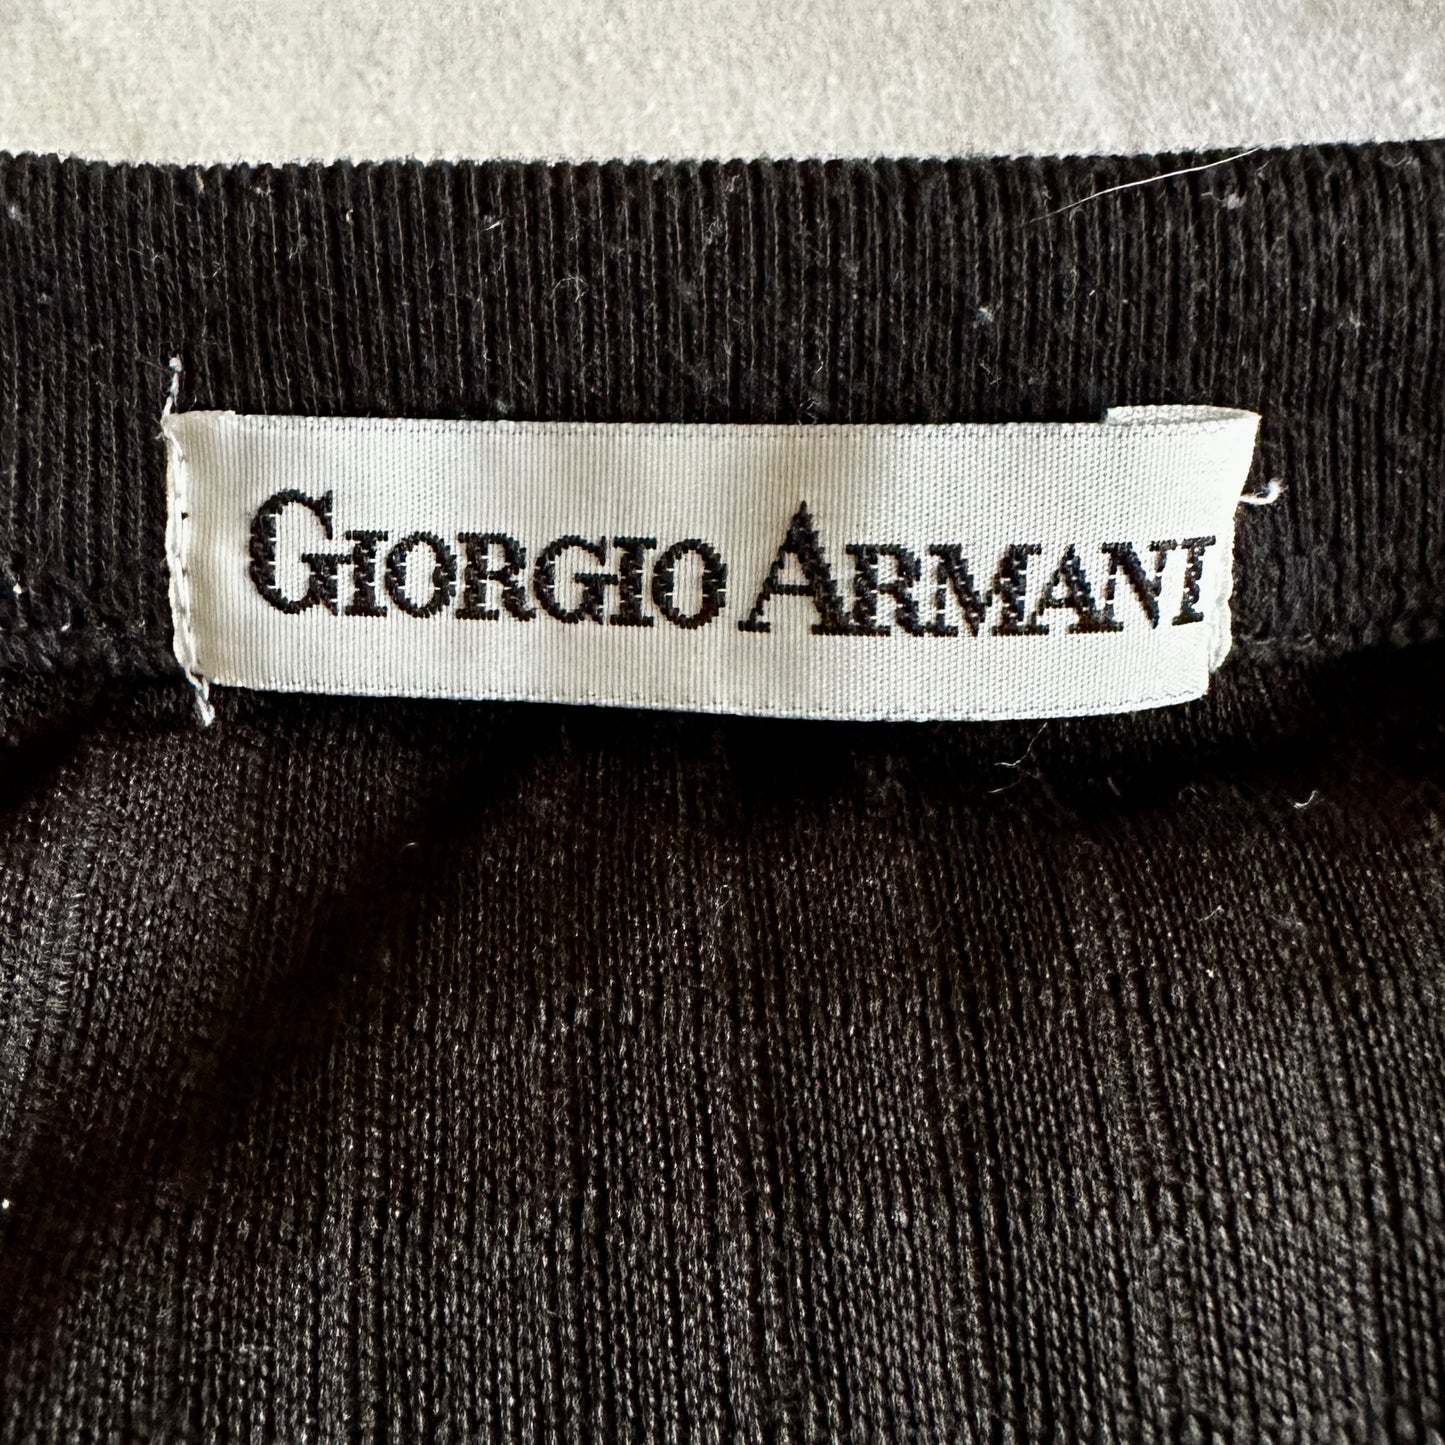 Giorgio Armani Vintage 80s T-Shirt - XL - Made in Italy